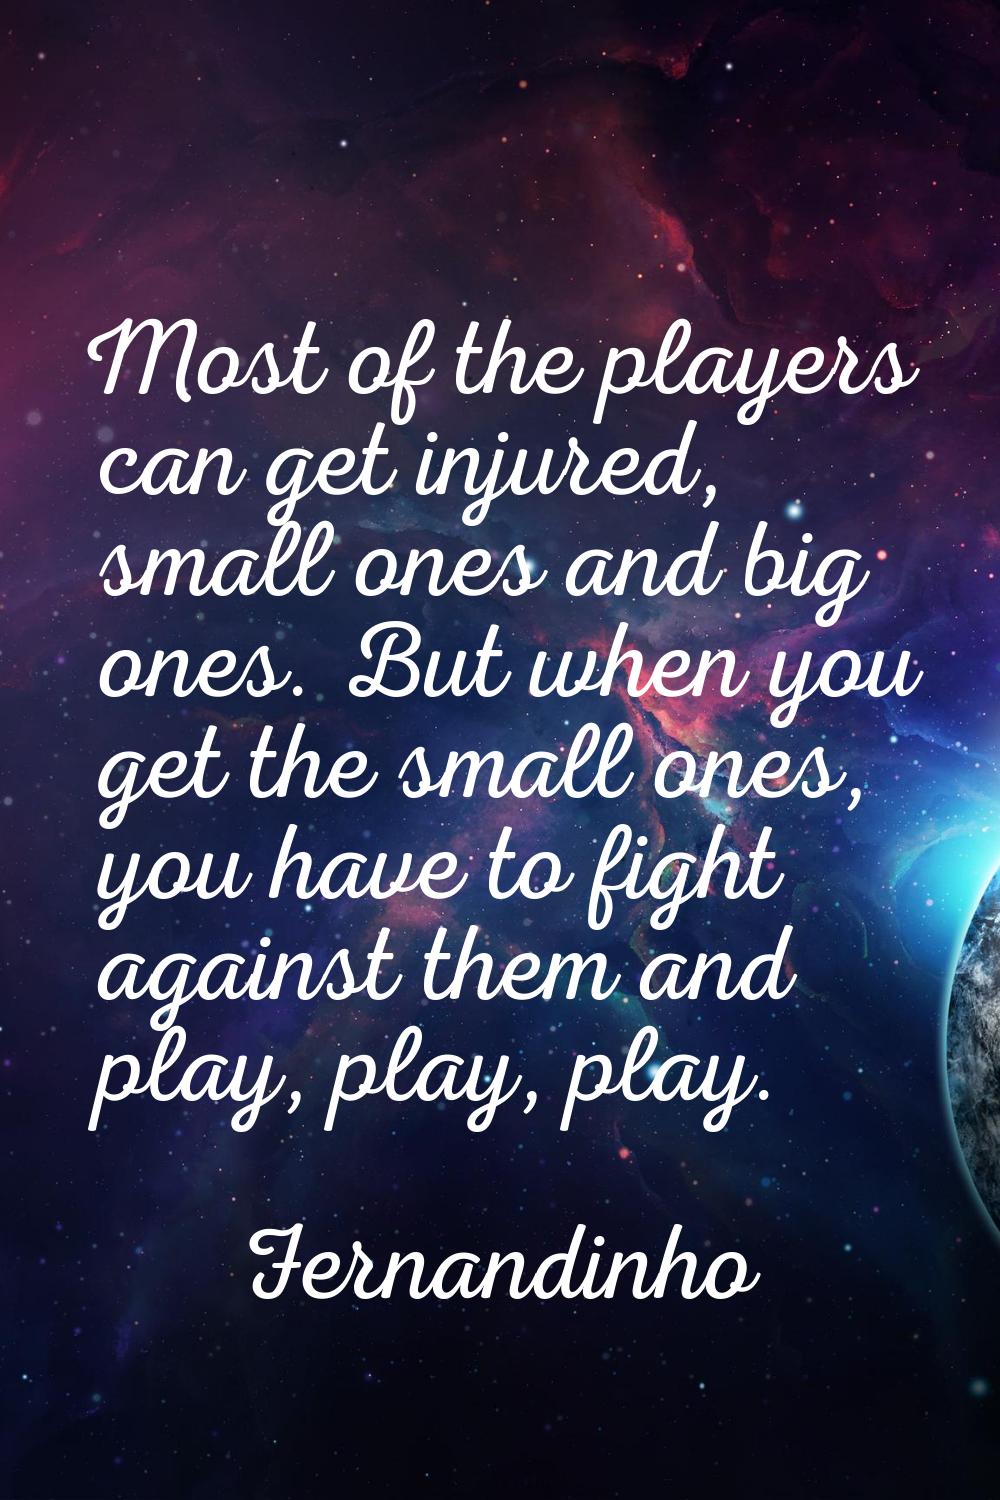 Most of the players can get injured, small ones and big ones. But when you get the small ones, you 